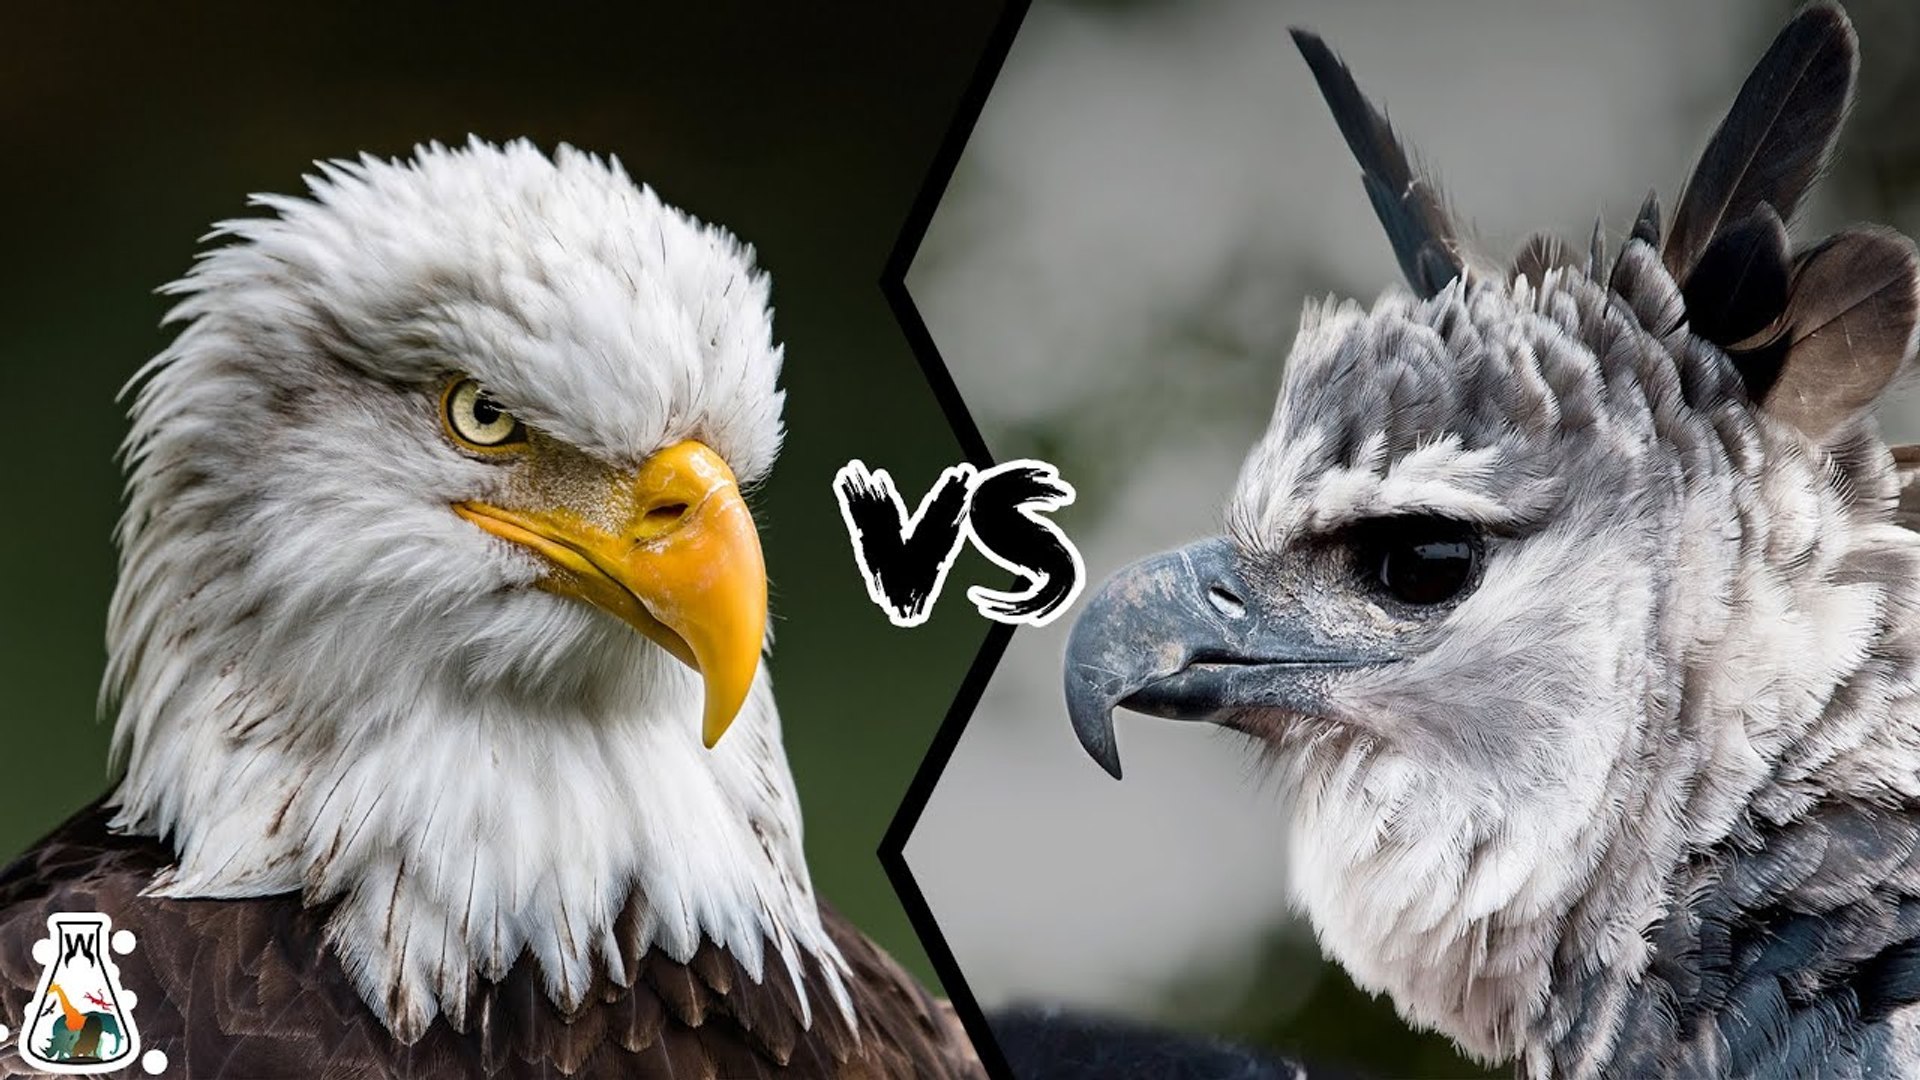 Which is more powerful: the BALD EAGLE or the HARPY EAGLE?